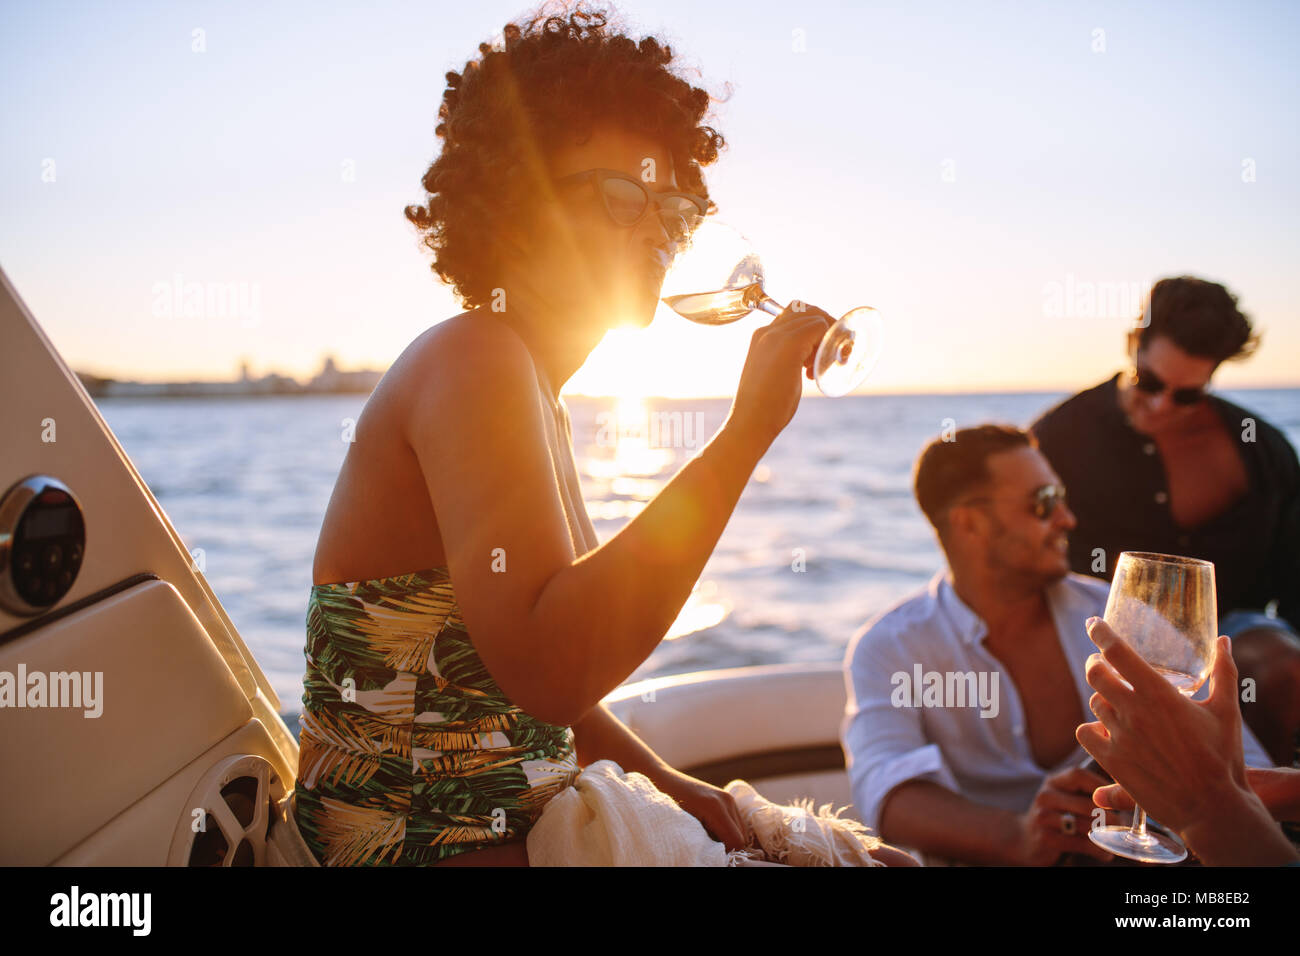 African woman drinking during sunset boat party with friends. Group of men and women having a boat party during sunset. Stock Photo